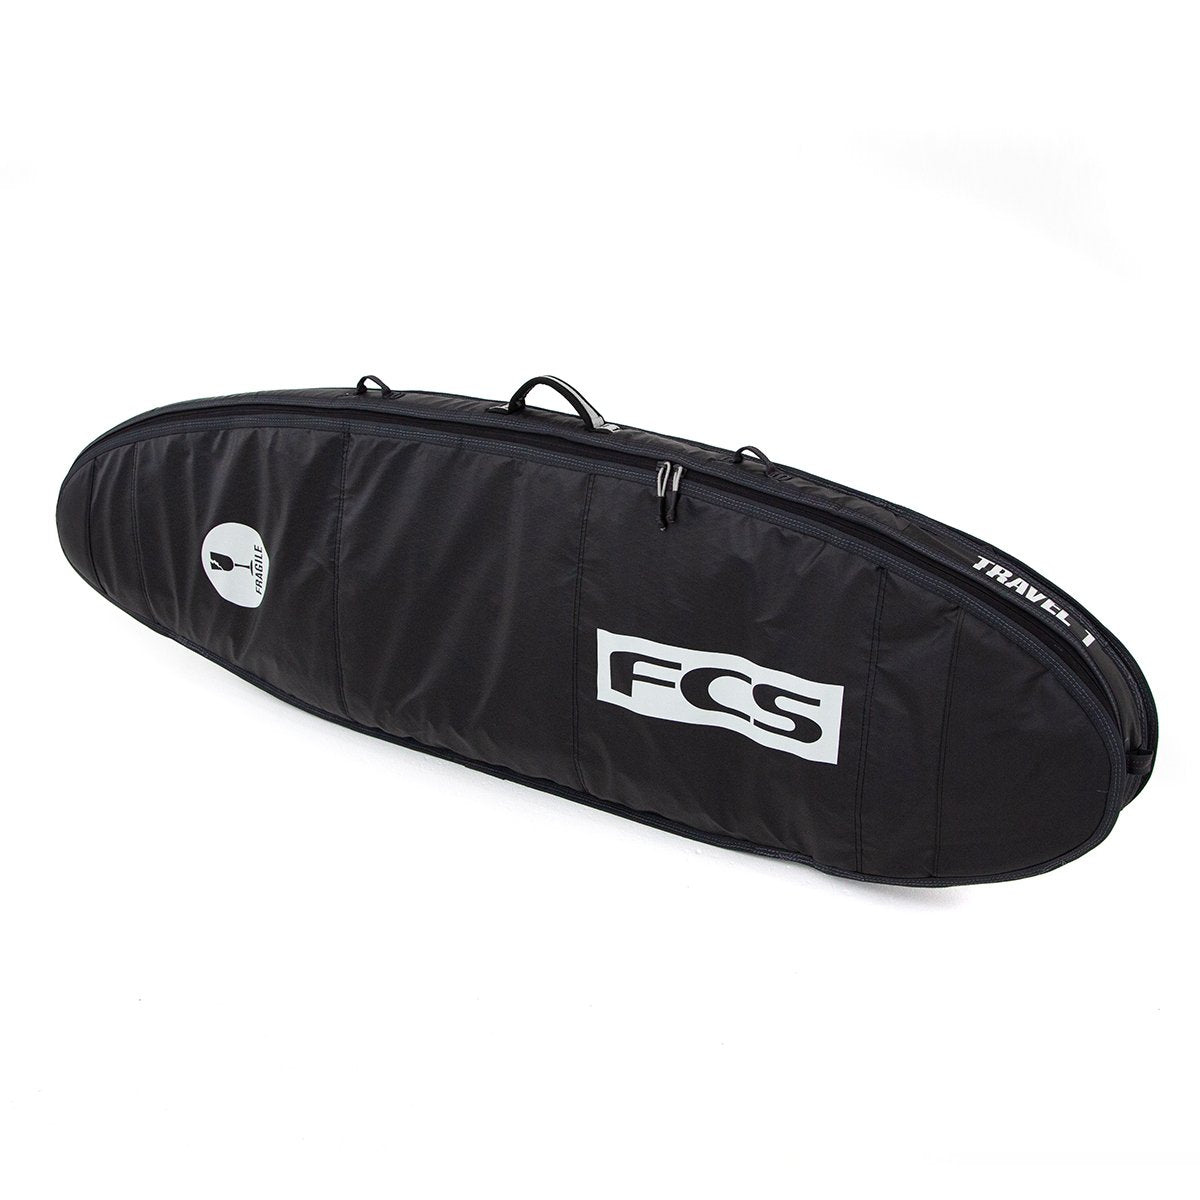 FCS Travel 1 Funboard Surfboard Cover - Board Store FCSBoardcover  